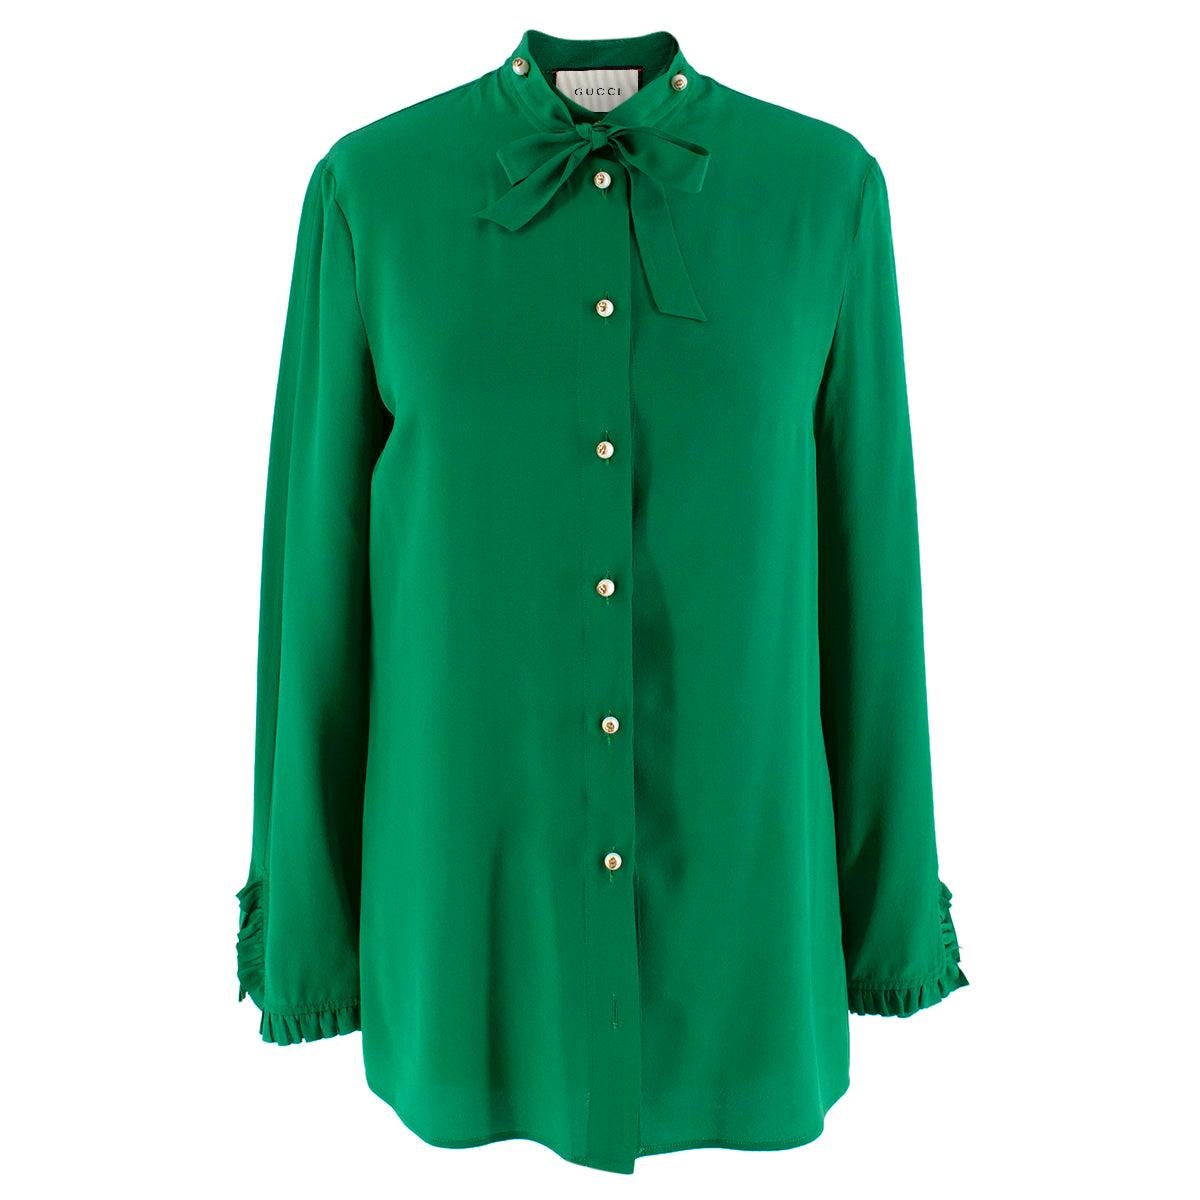 Gucci Green Silk Shirt with Pearl Buttons & Necktie 40